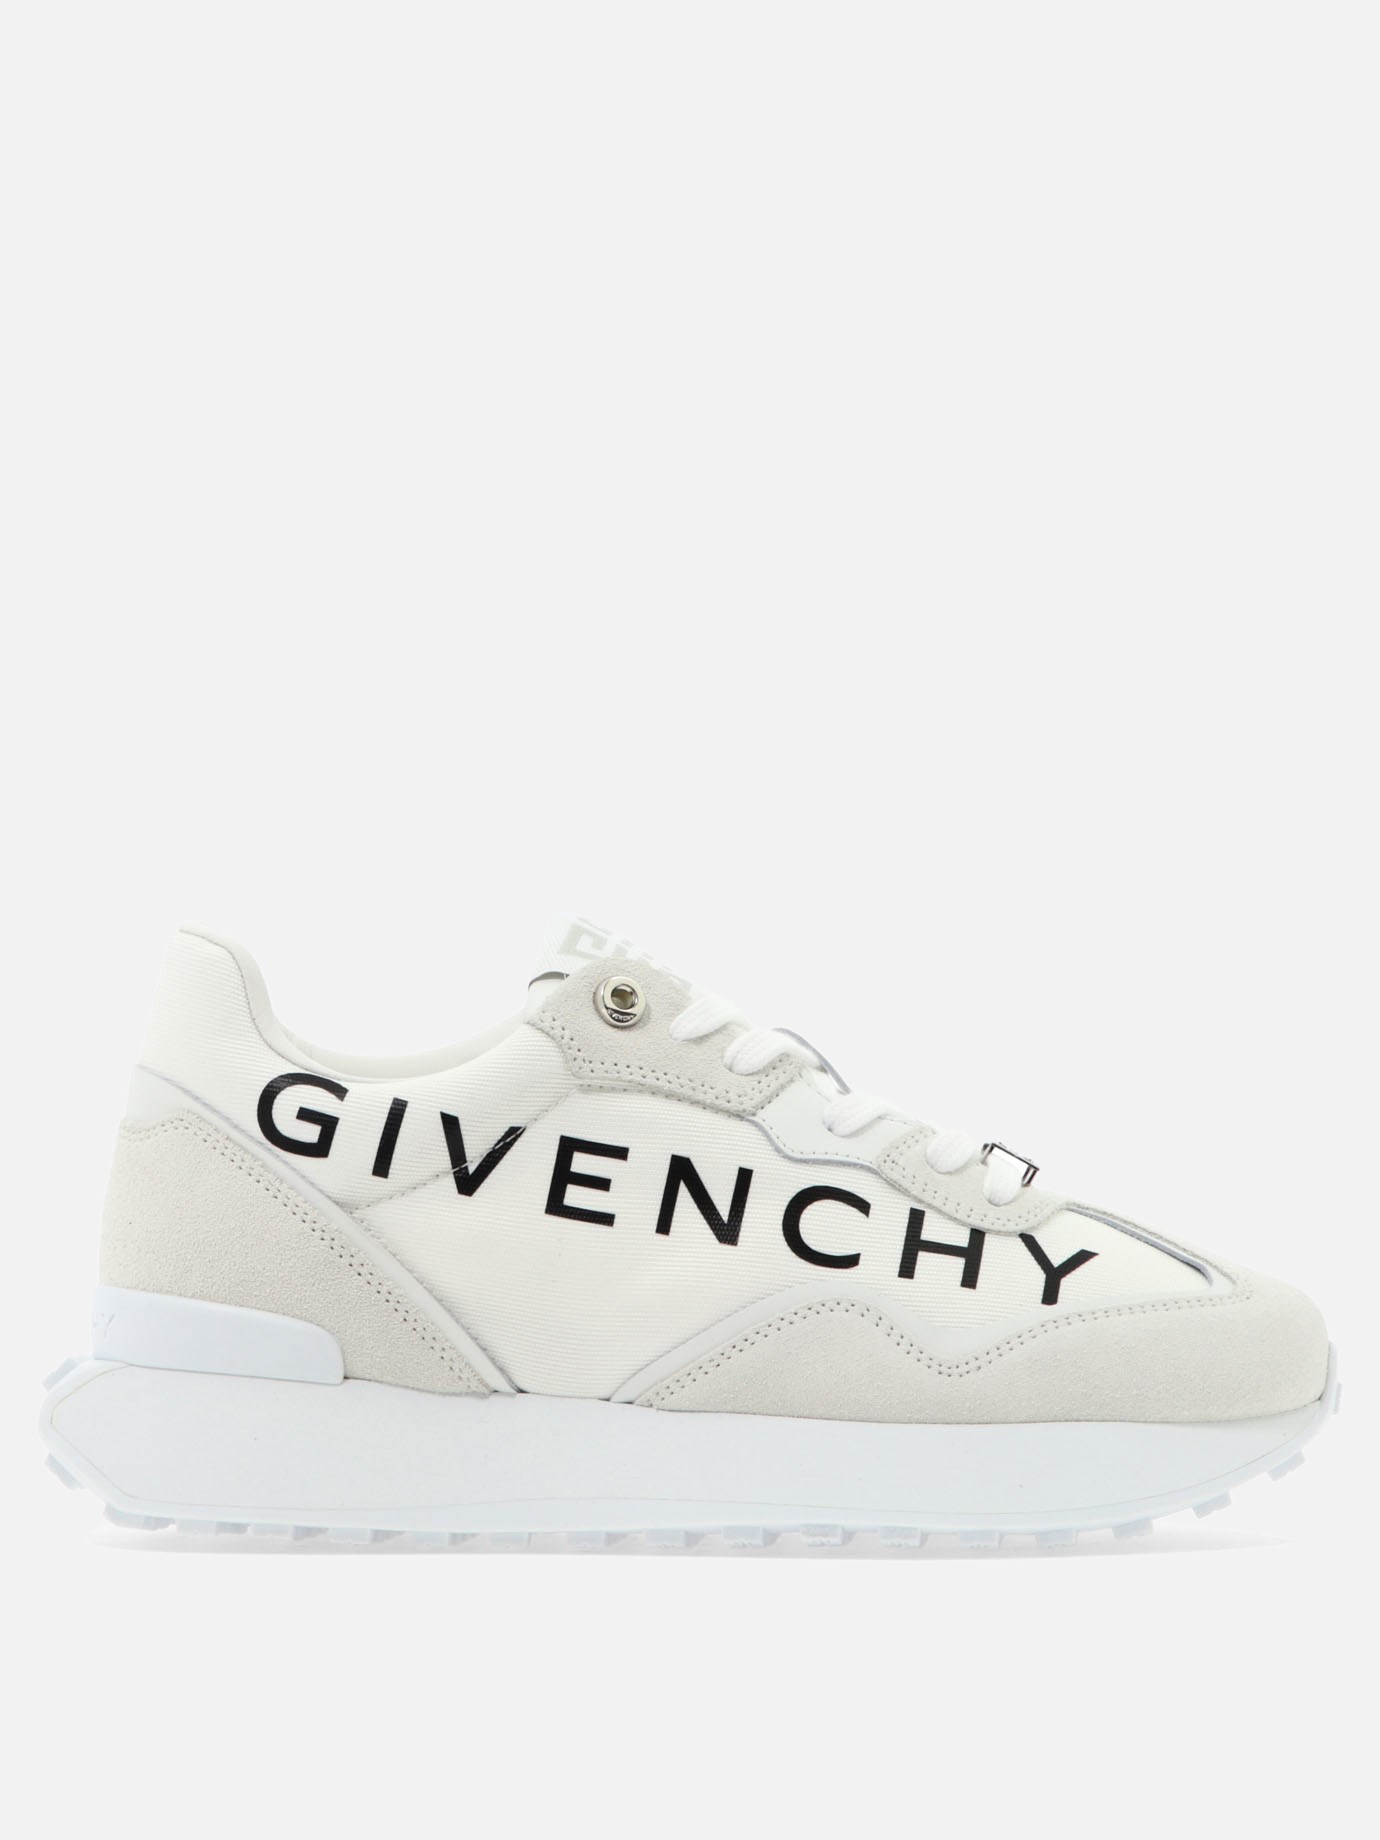  Giv Runner  sneakersby Givenchy - 5